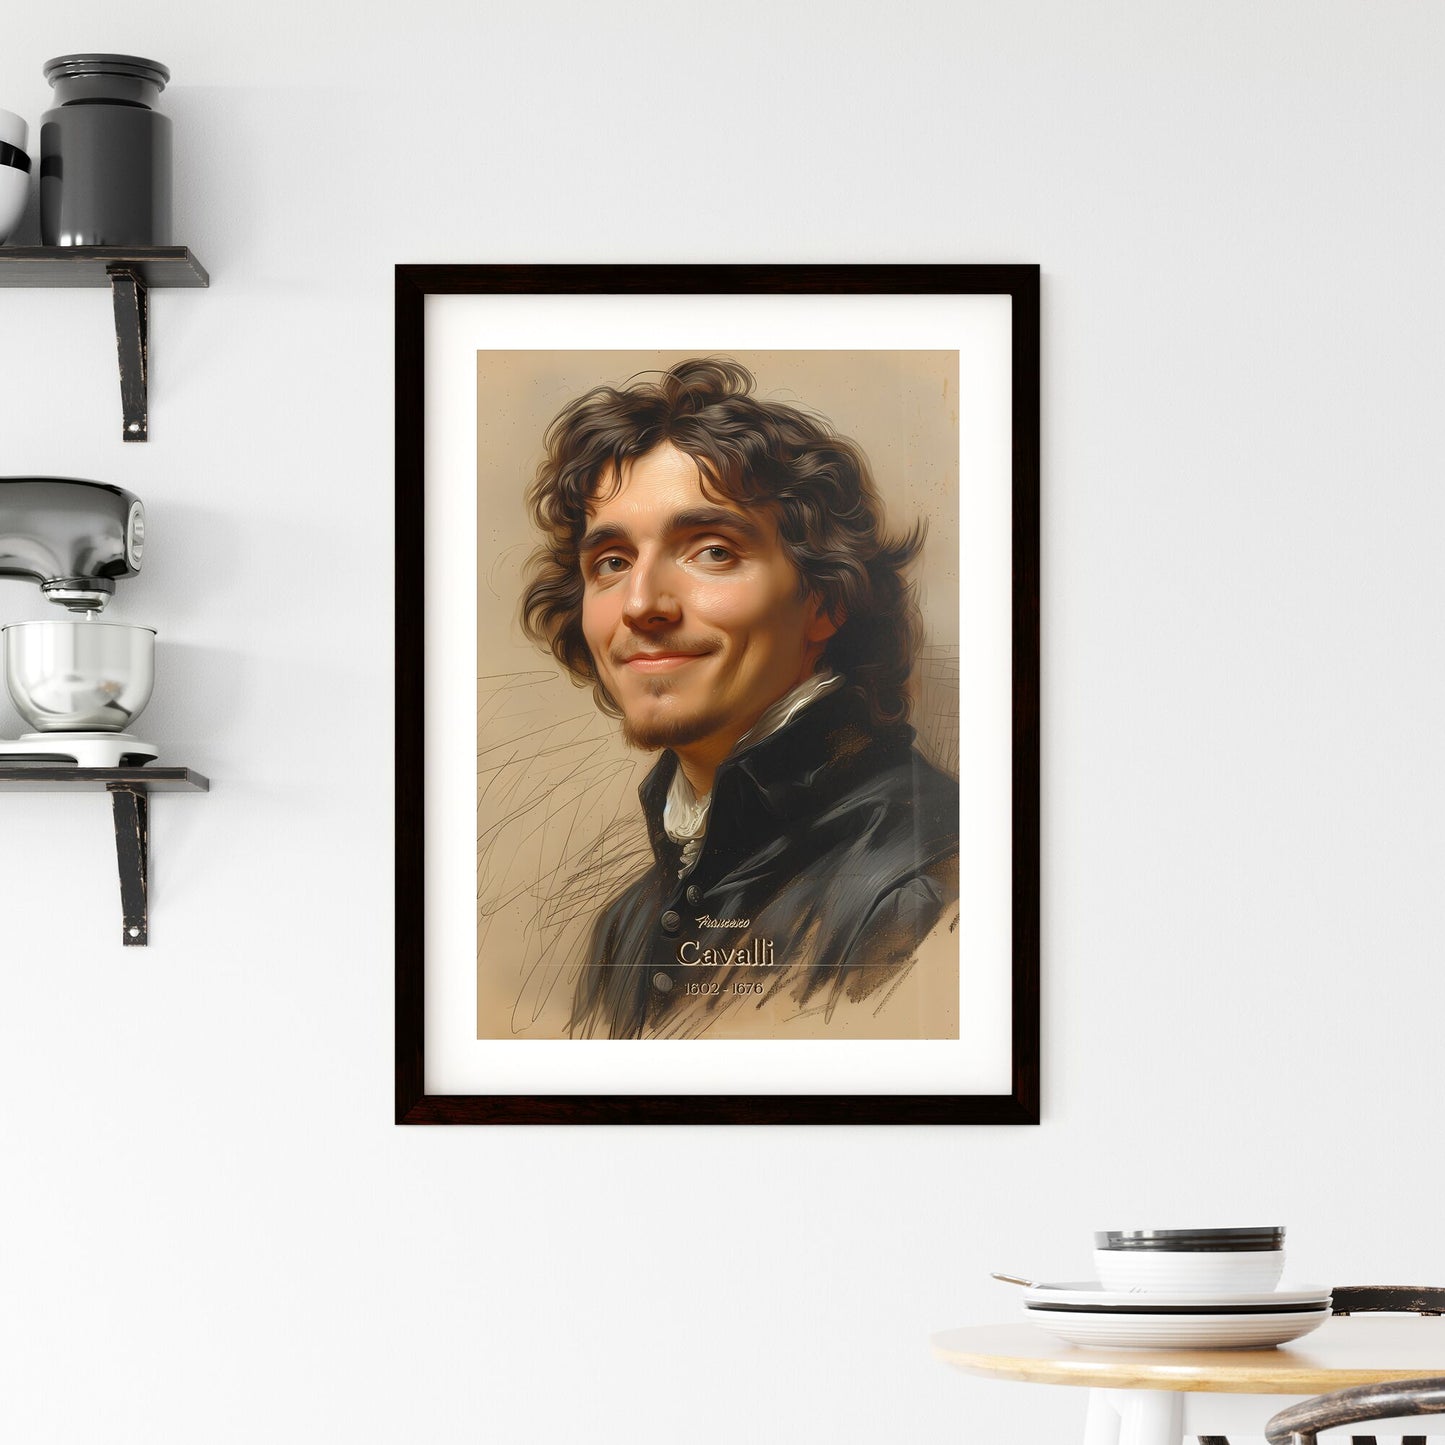 Francesco, Cavalli, 1602 - 1676, A Poster of a man with curly hair smiling Default Title